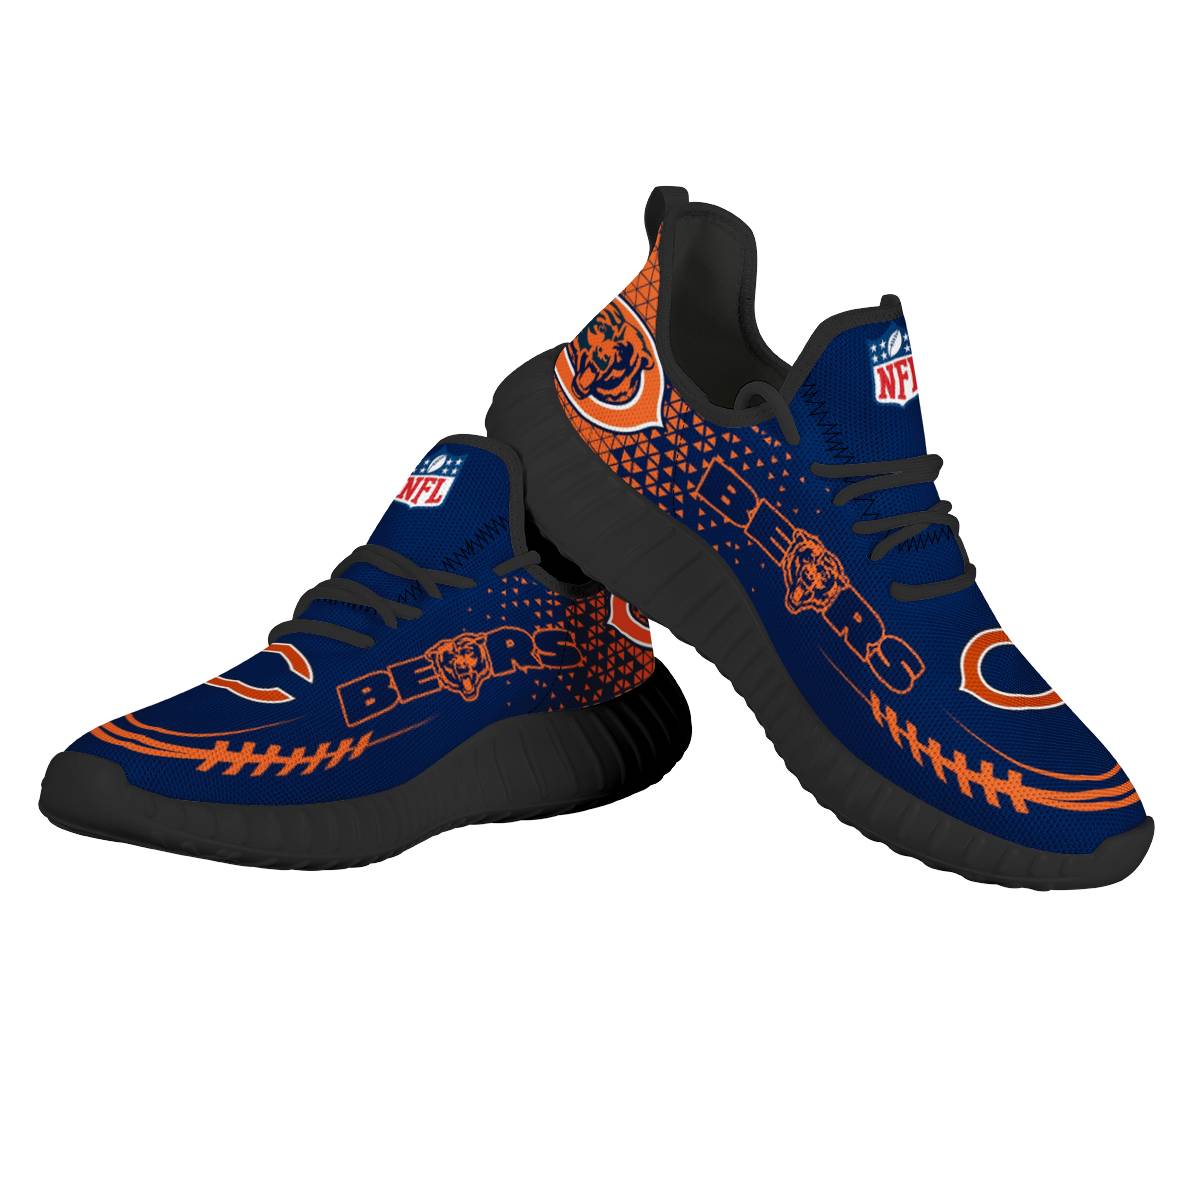 Women's Chicago Bears Mesh Knit Sneakers/Shoes 010